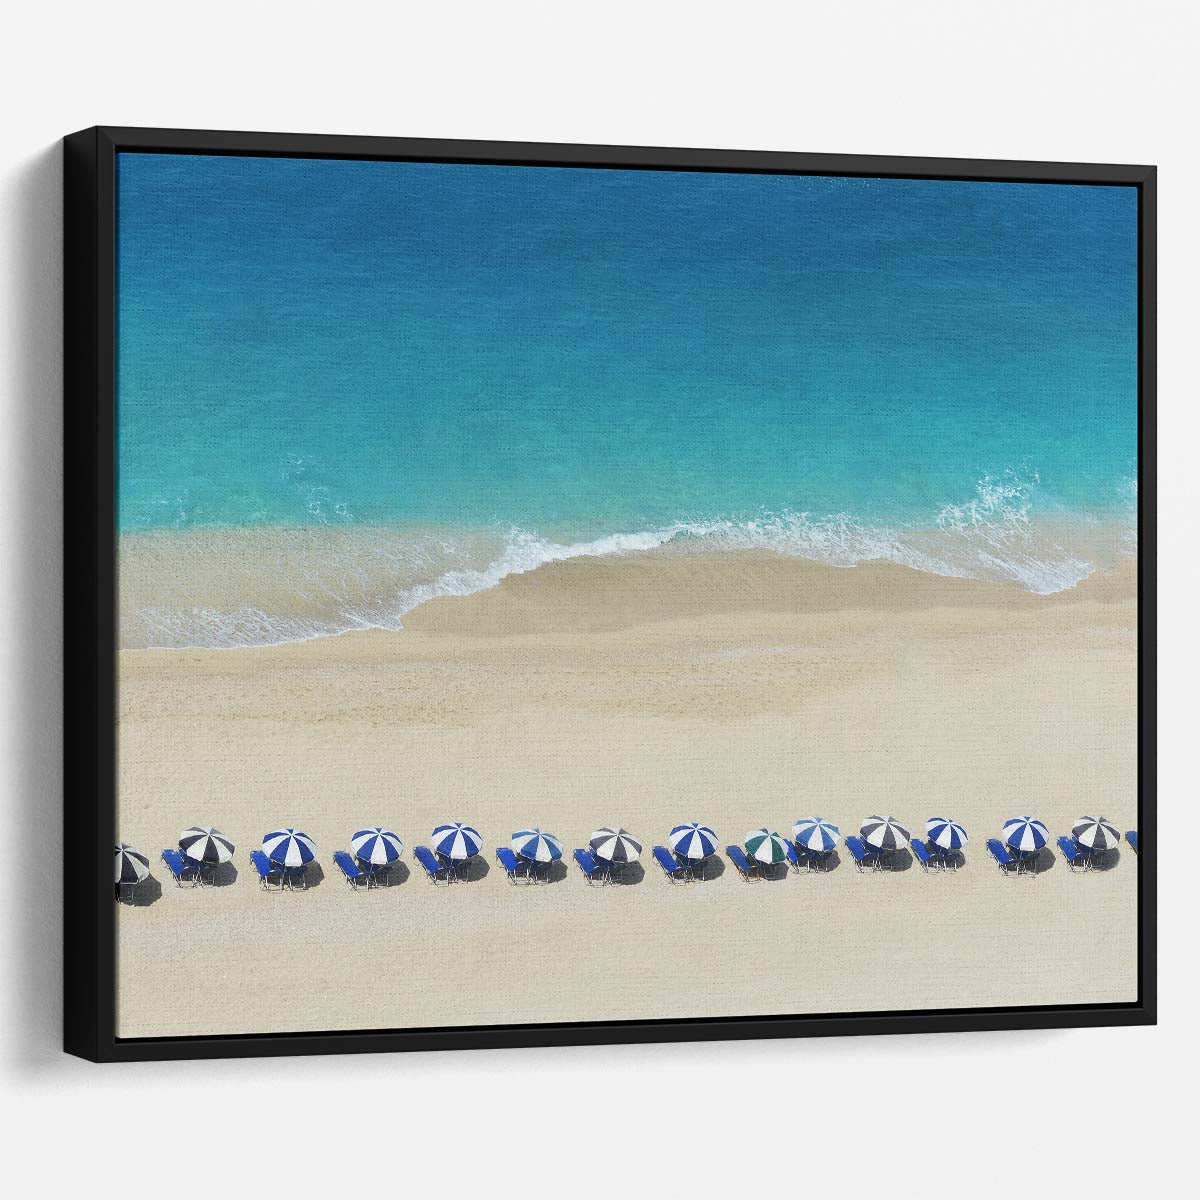 Turquoise Coastline Paradise Aerial View Wall Art by Luxuriance Designs. Made in USA.